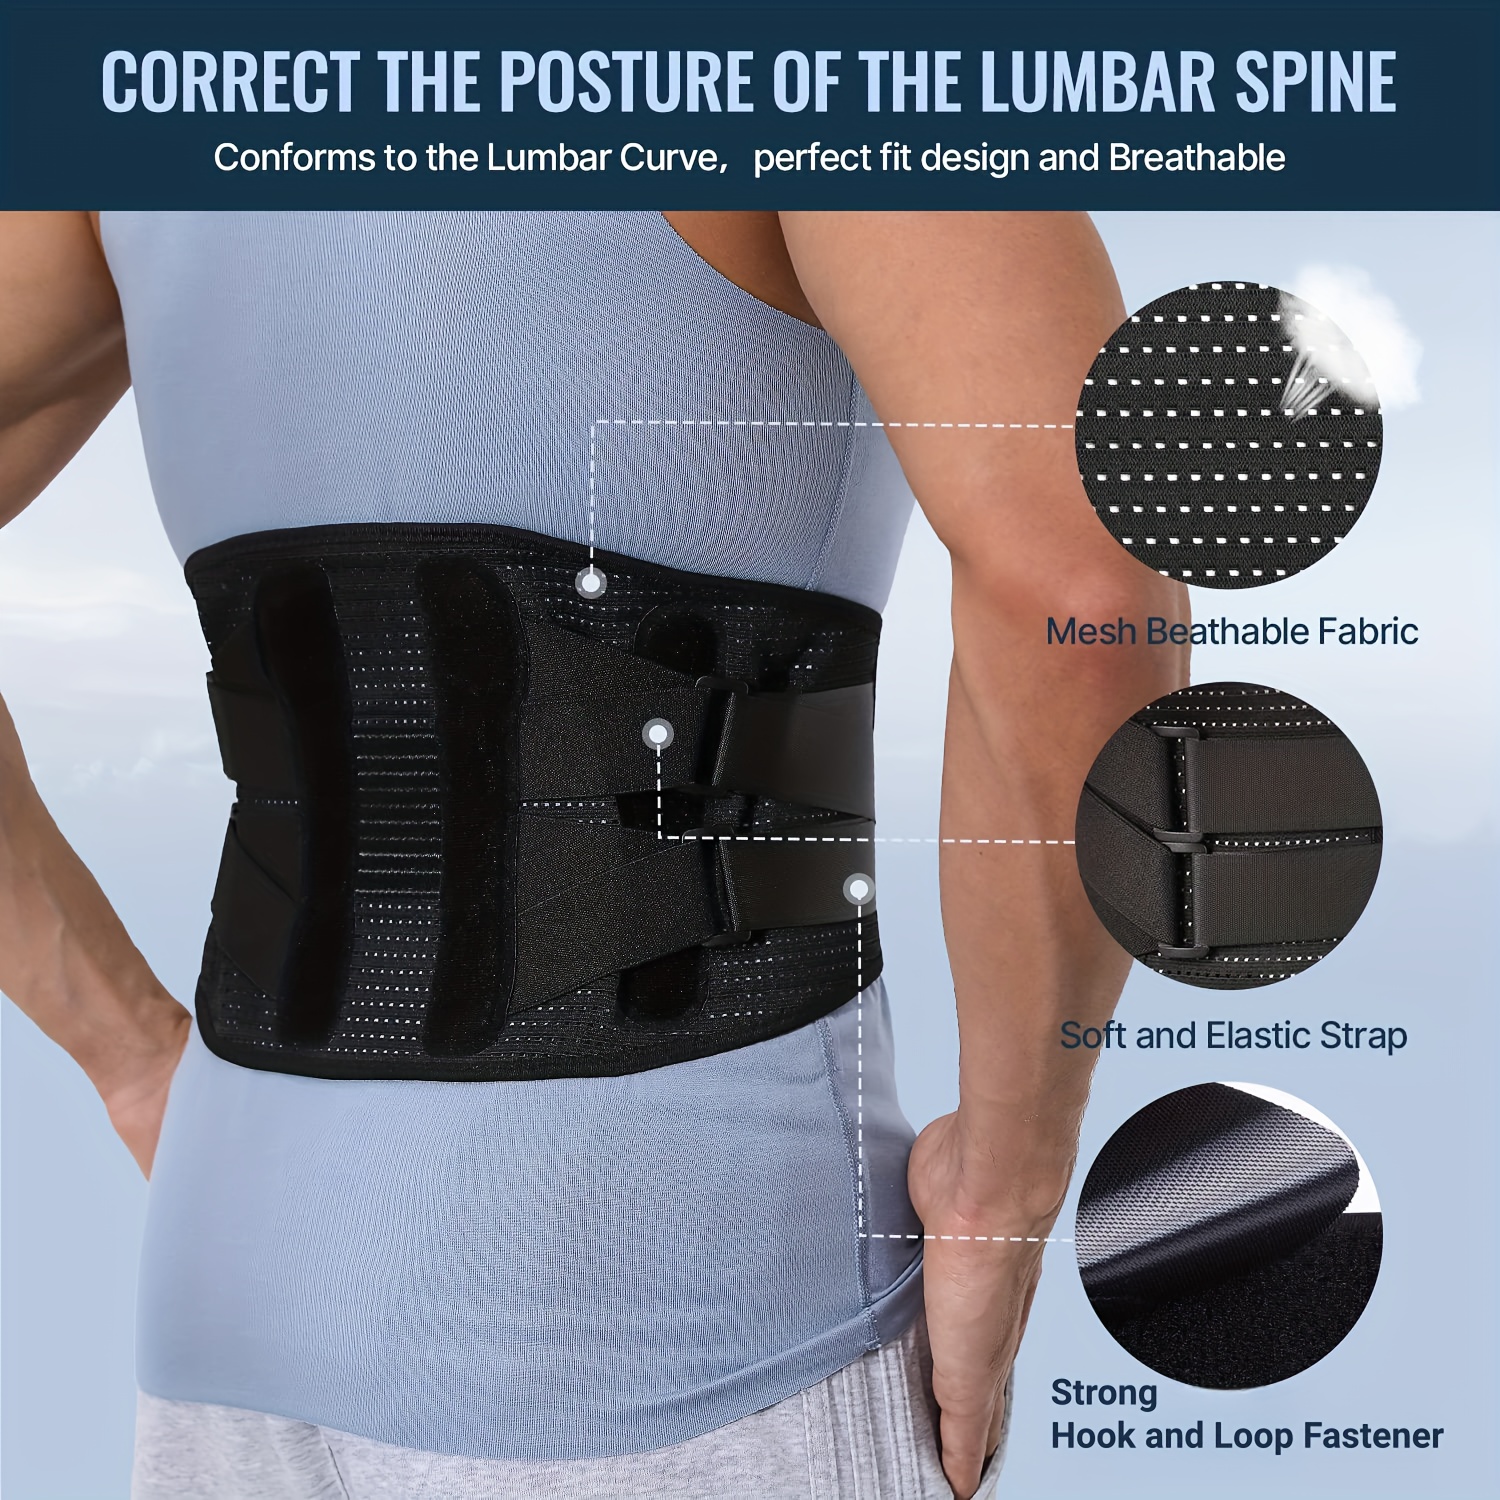 Types of Back Braces Used for Lower Back Pain Relief